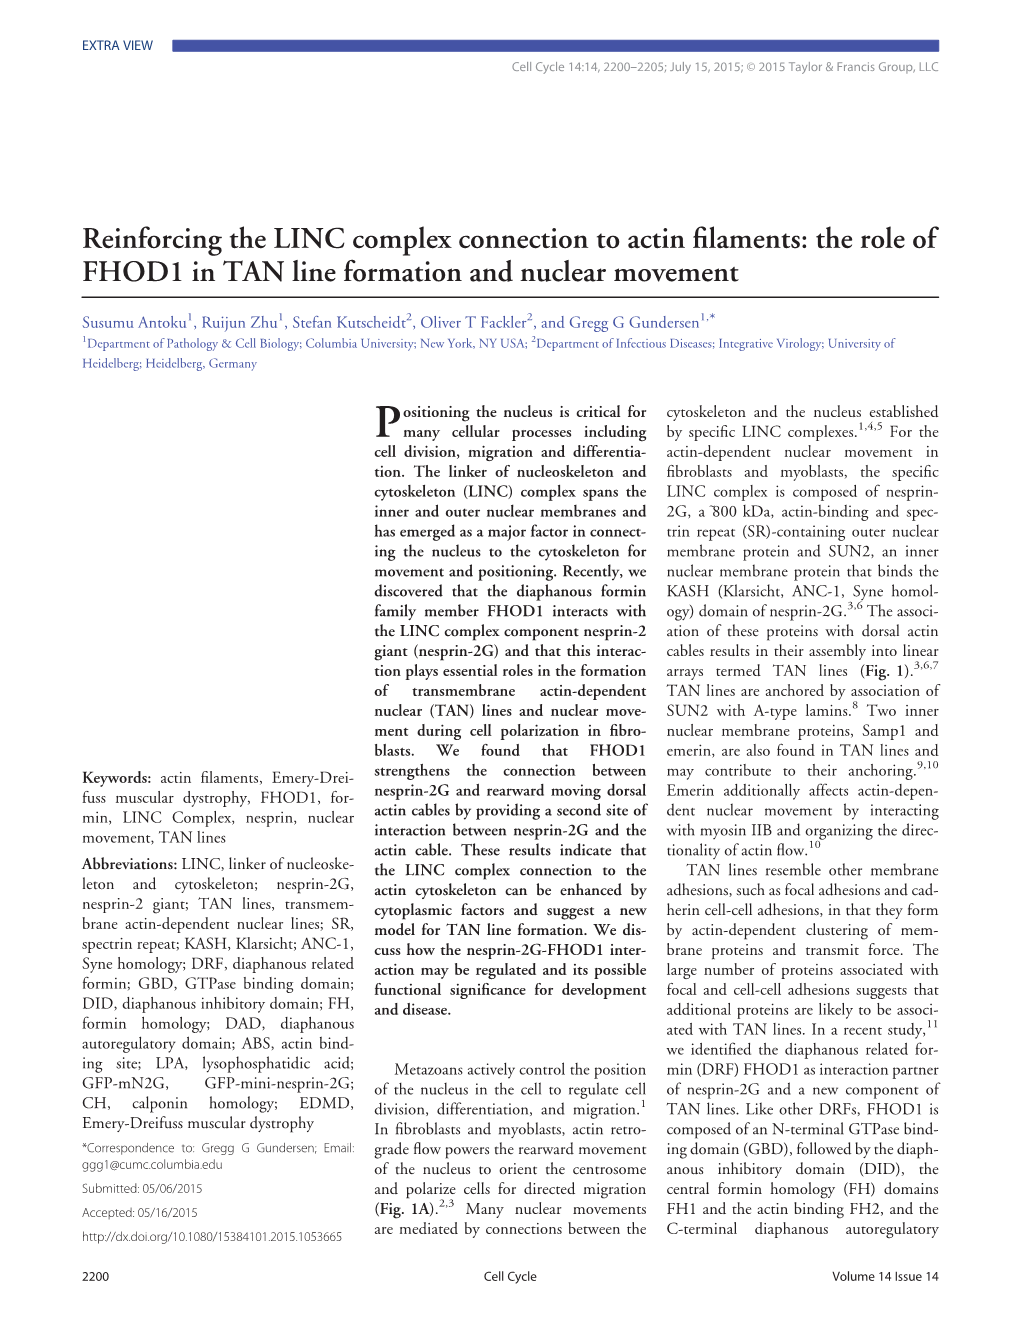 Reinforcing the LINC Complex Connection to Actin Filaments: The